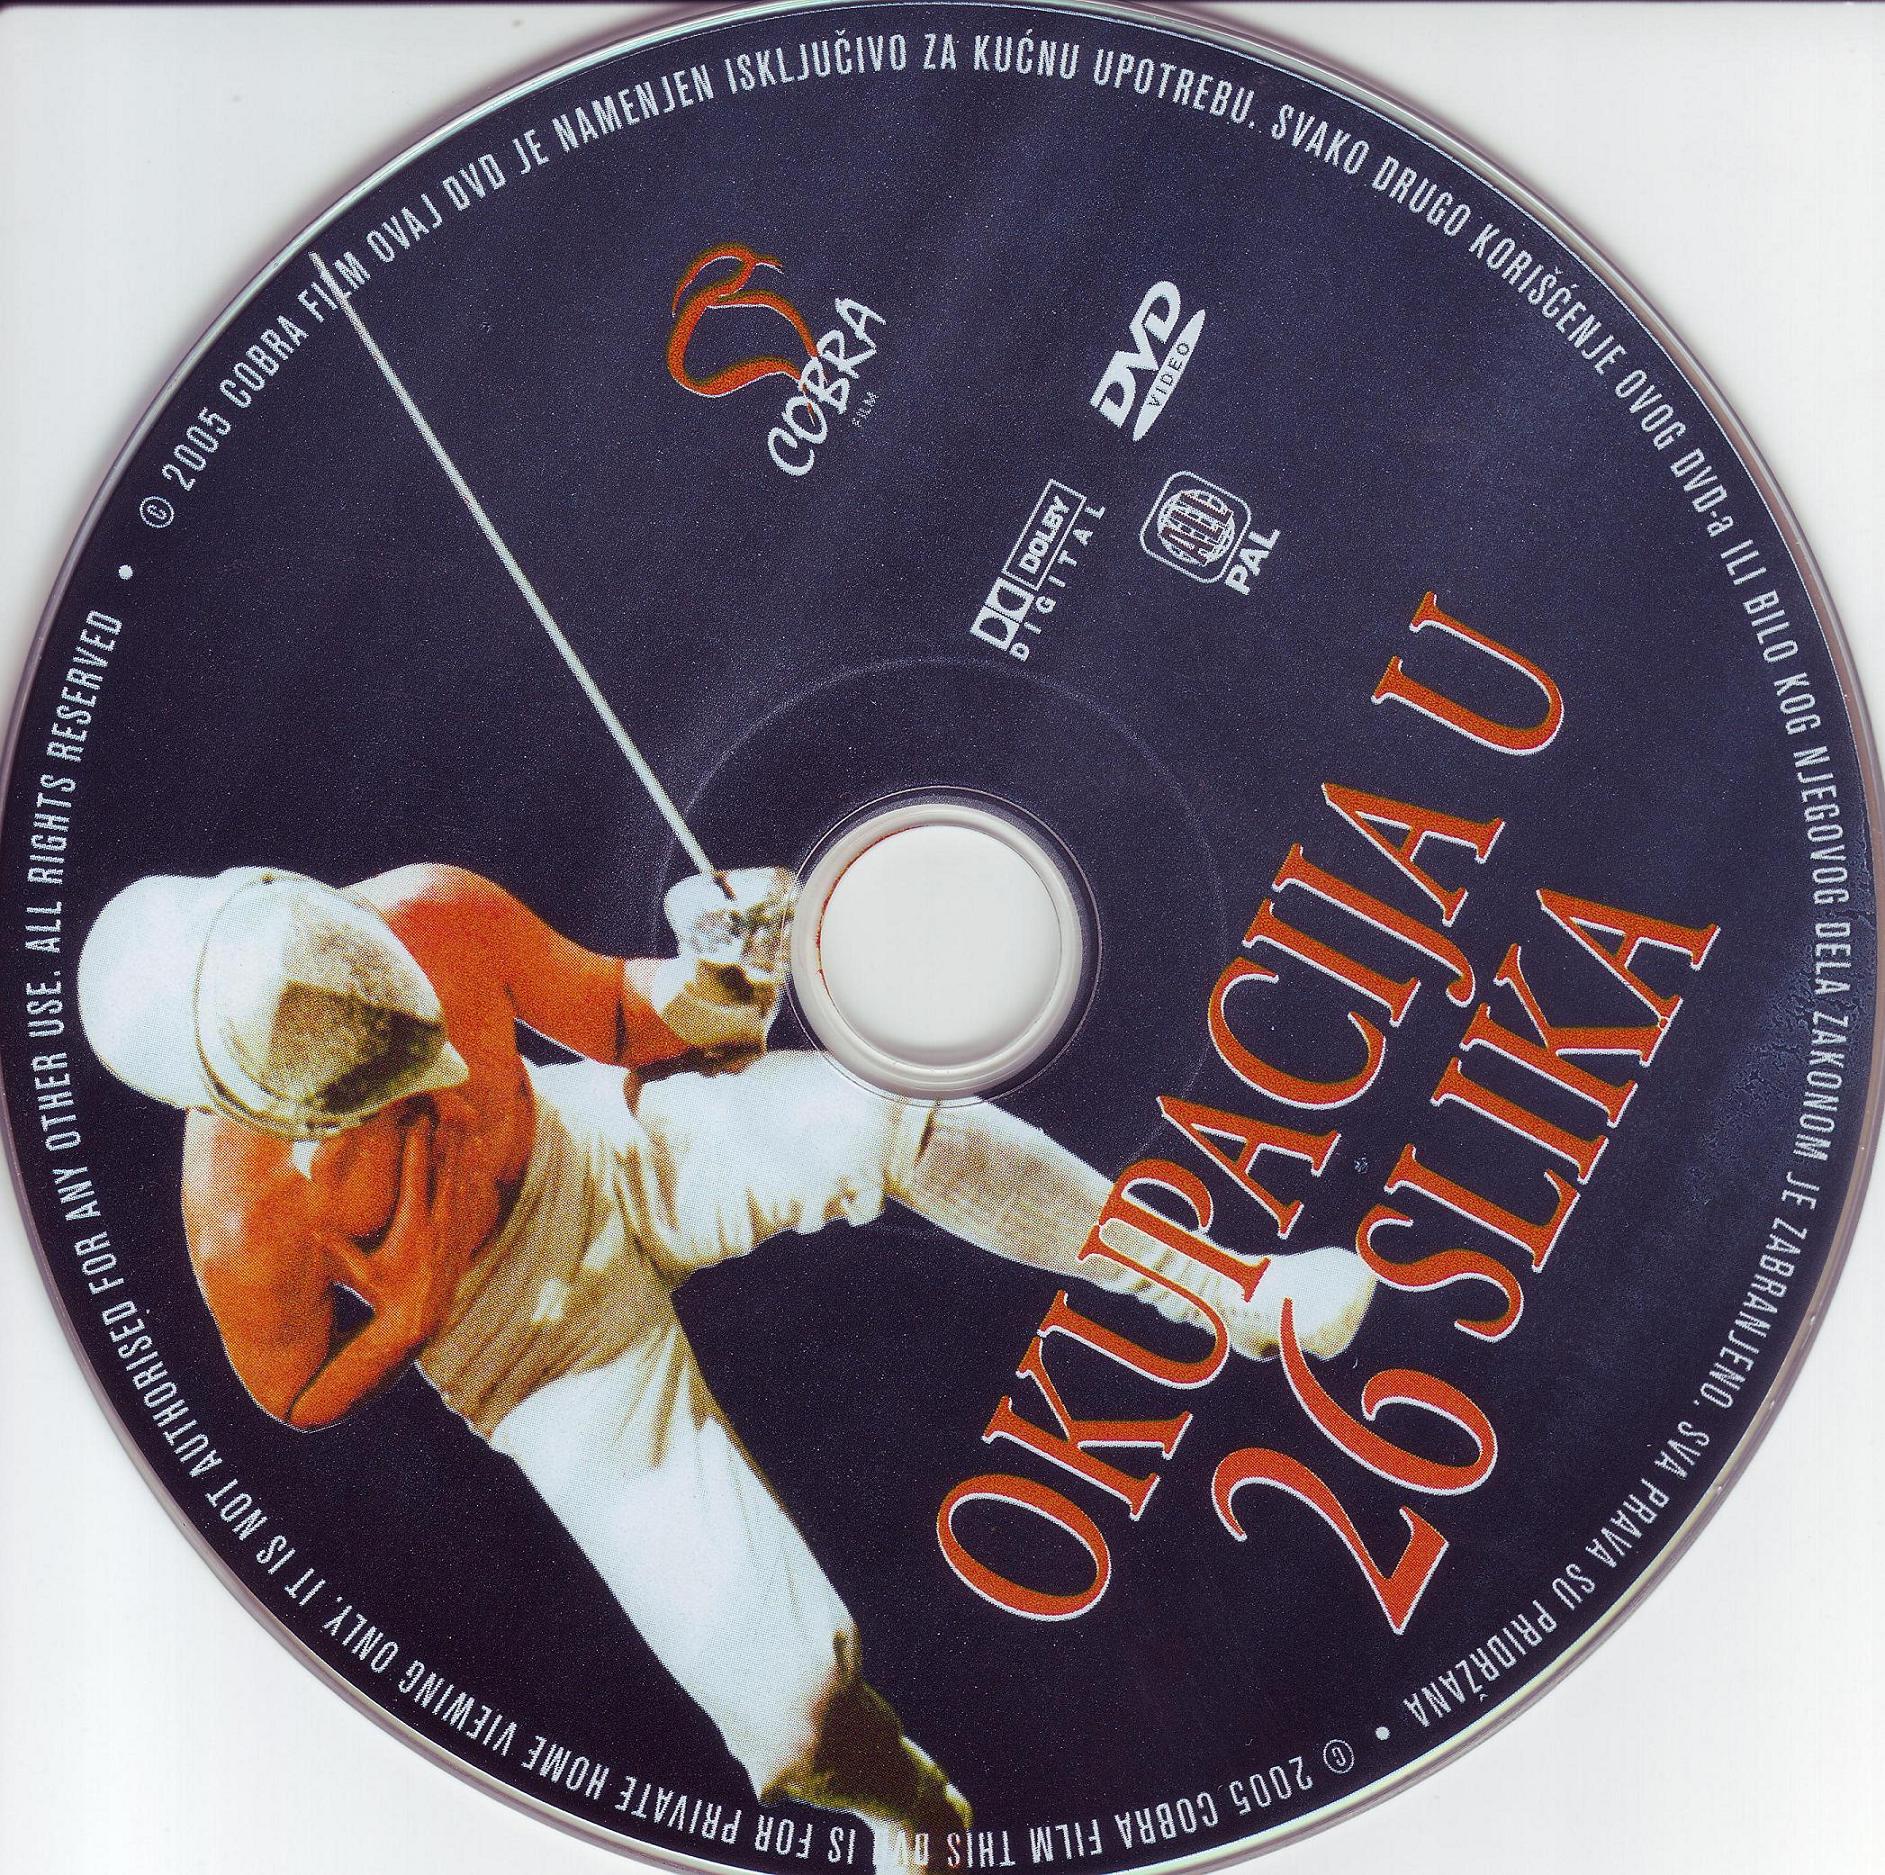 Click to view full size image -  DVD Cover - O - DVD - OKUPACIJA U 26 SLIKA - CD - DVD - OKUPACIJA U 26 SLIKA - CD.JPG